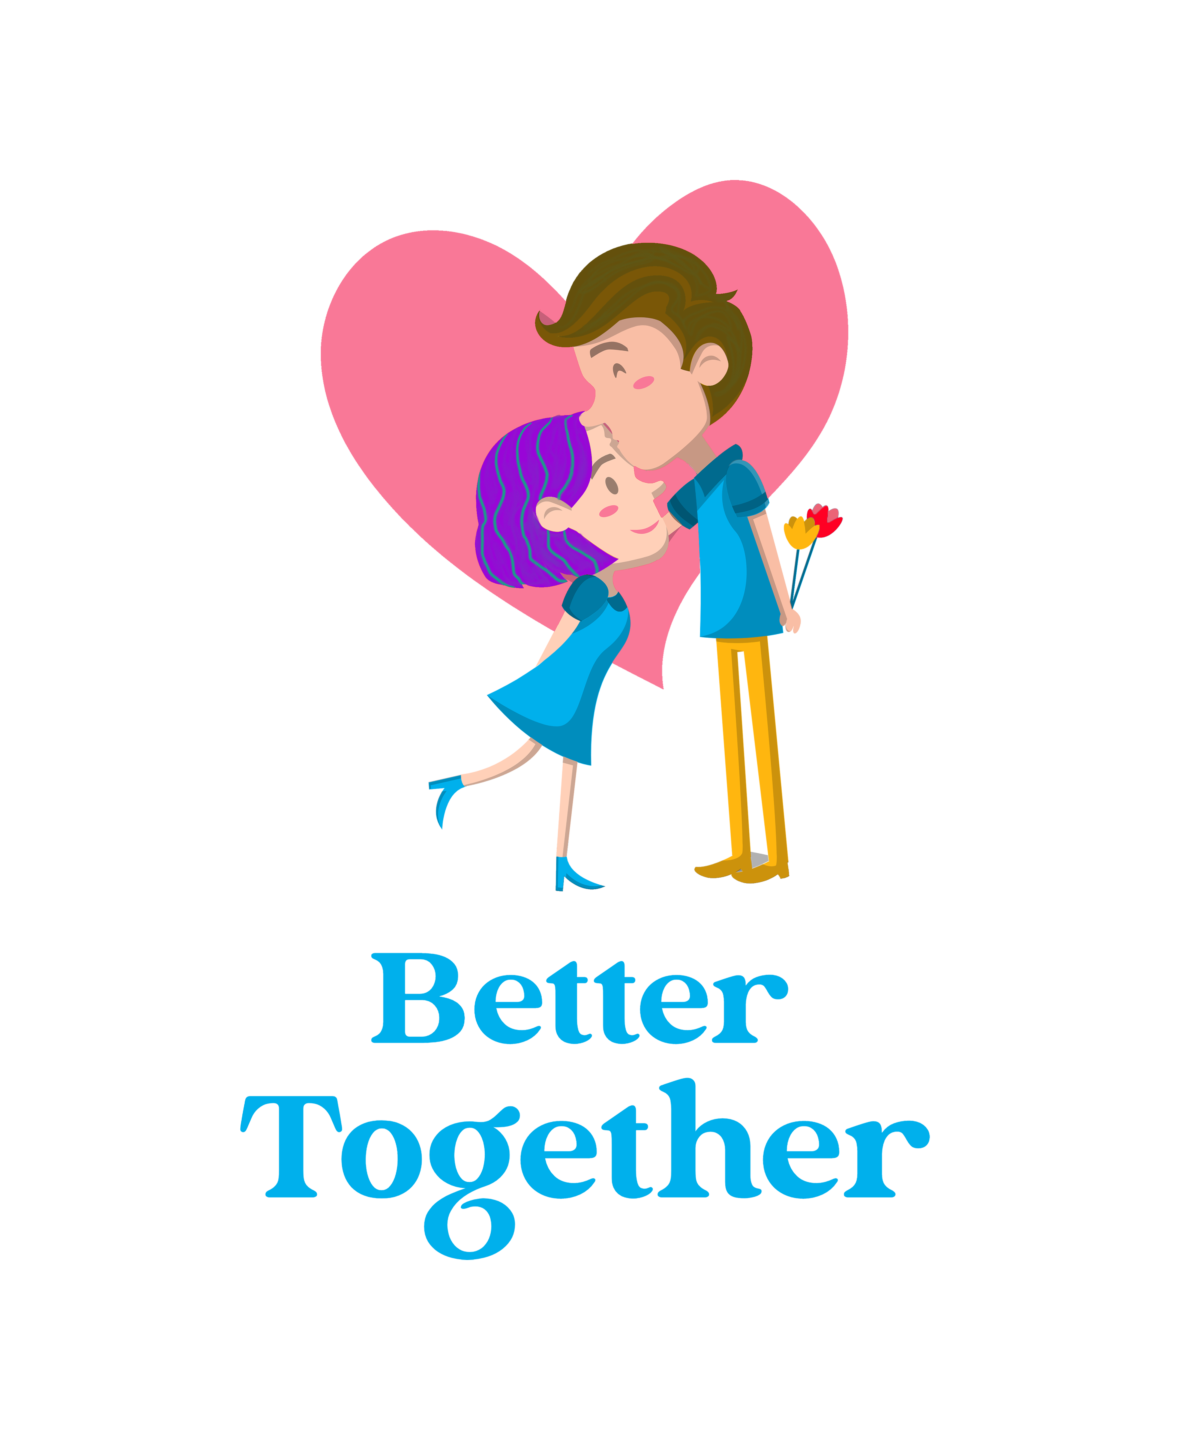 Couple in love, man giving woman a kiss on forehead. 4000px by 4800px PNG with transparent background.